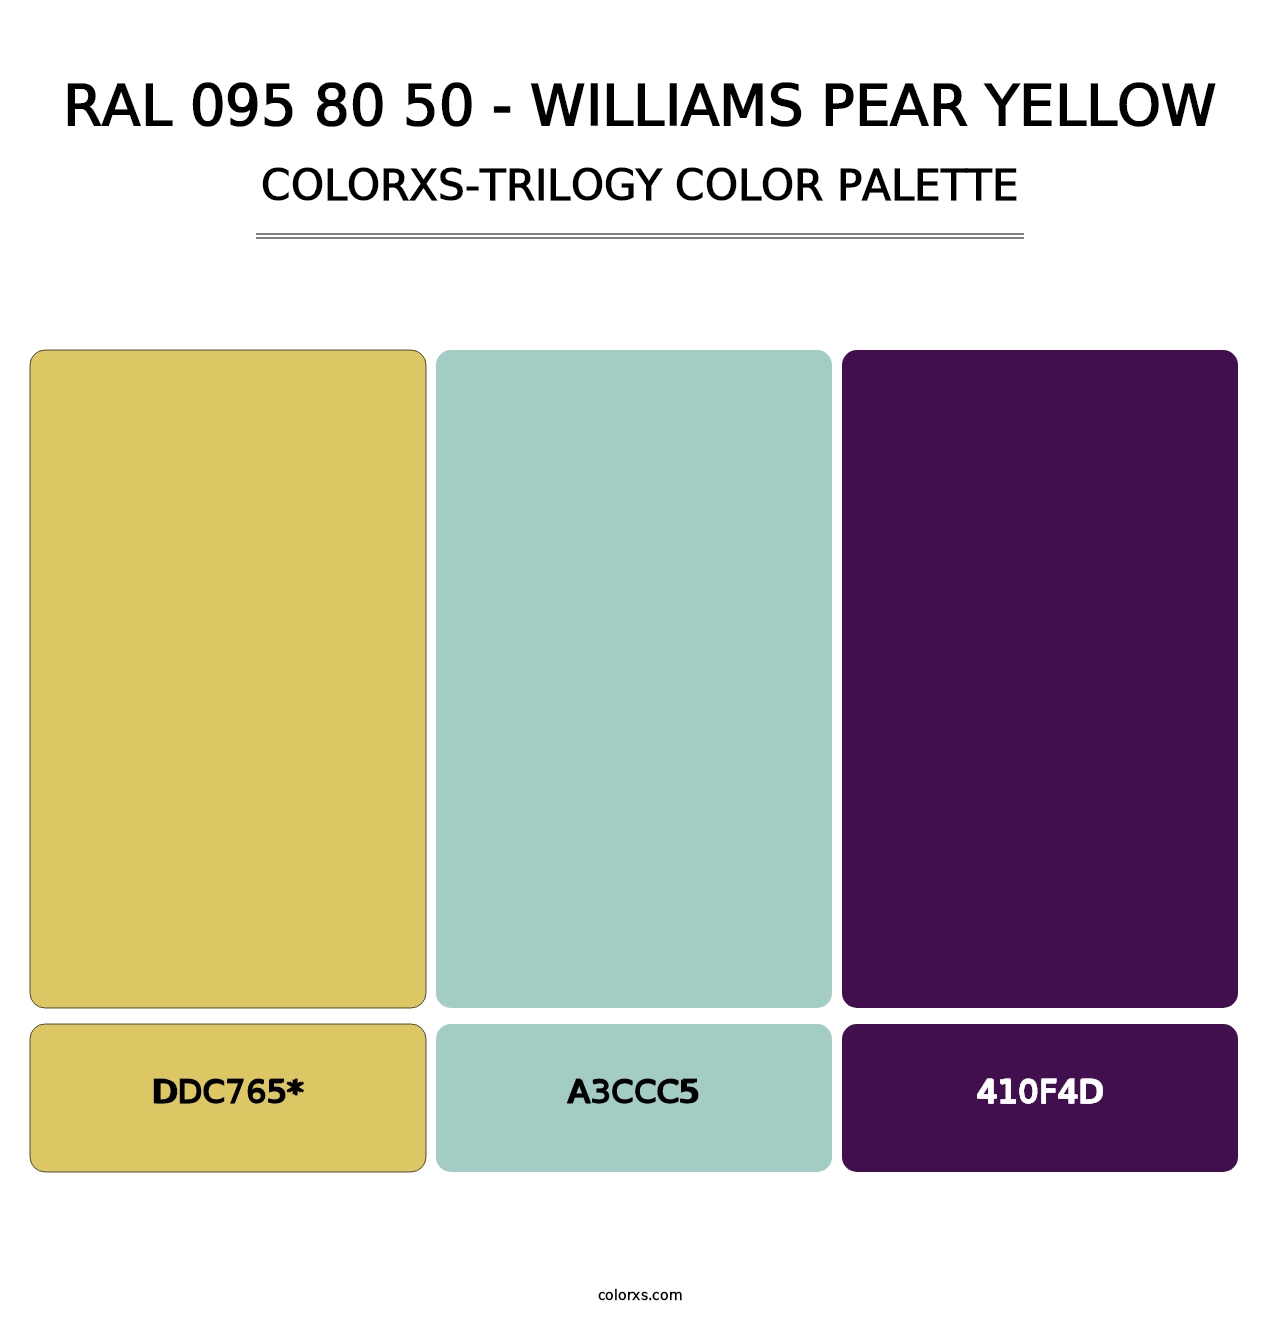 RAL 095 80 50 - Williams Pear Yellow - Colorxs Trilogy Palette